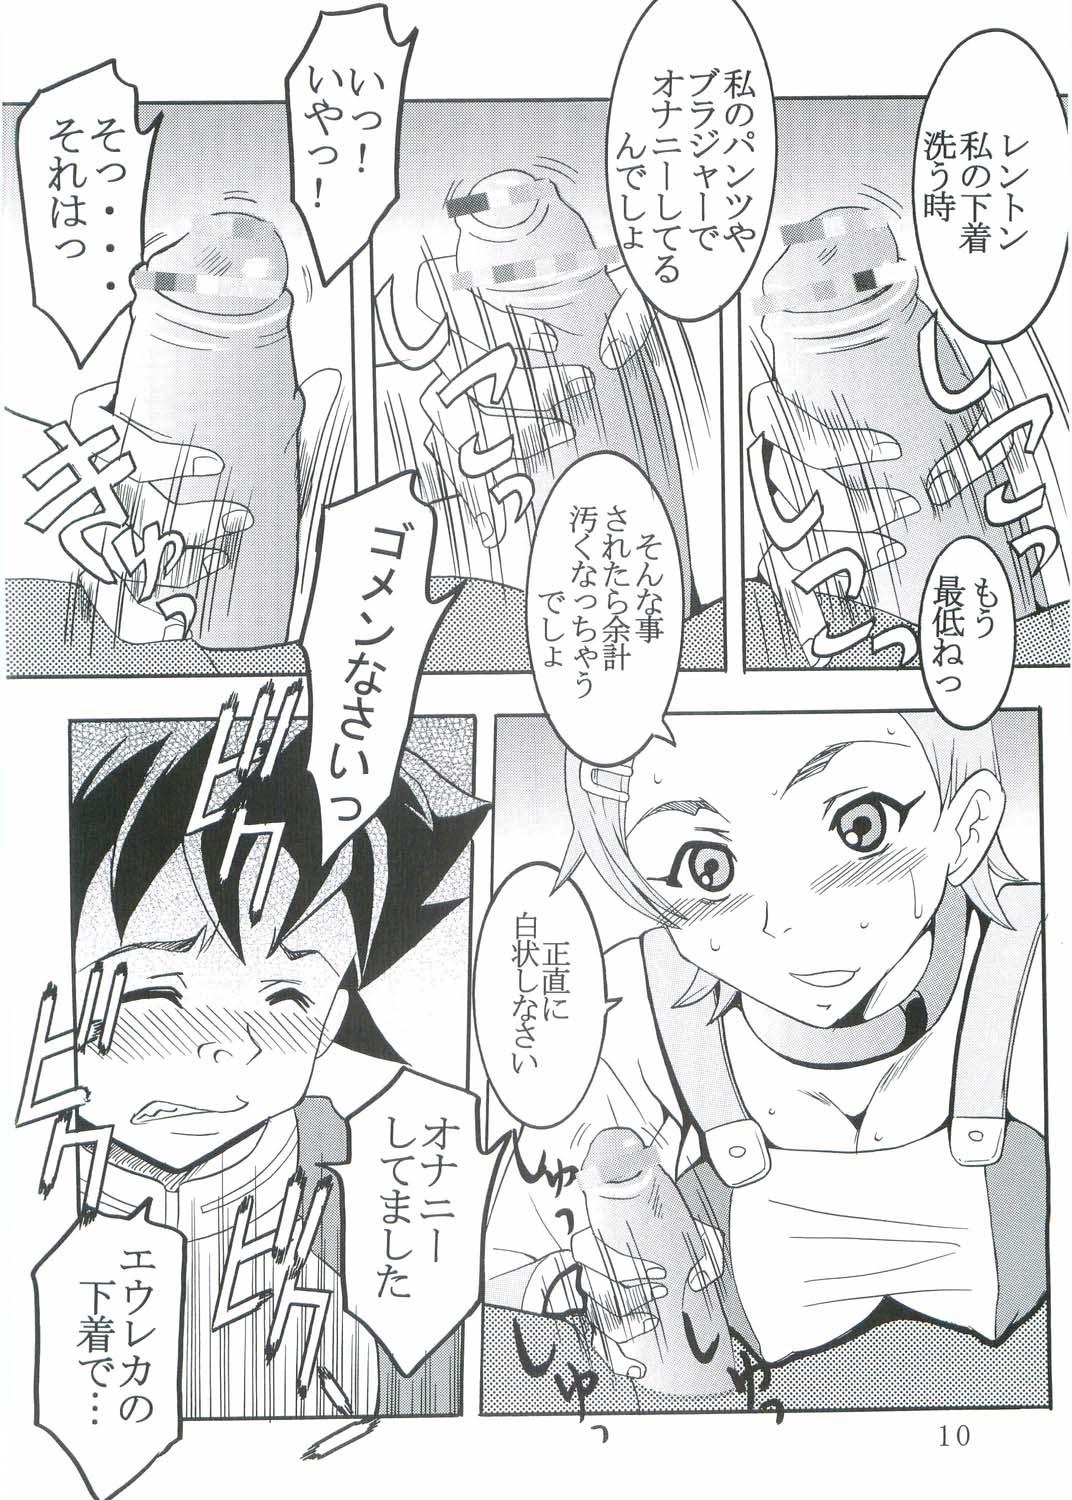 Finger Ura ray-out - Eureka 7 Lolicon - Page 11